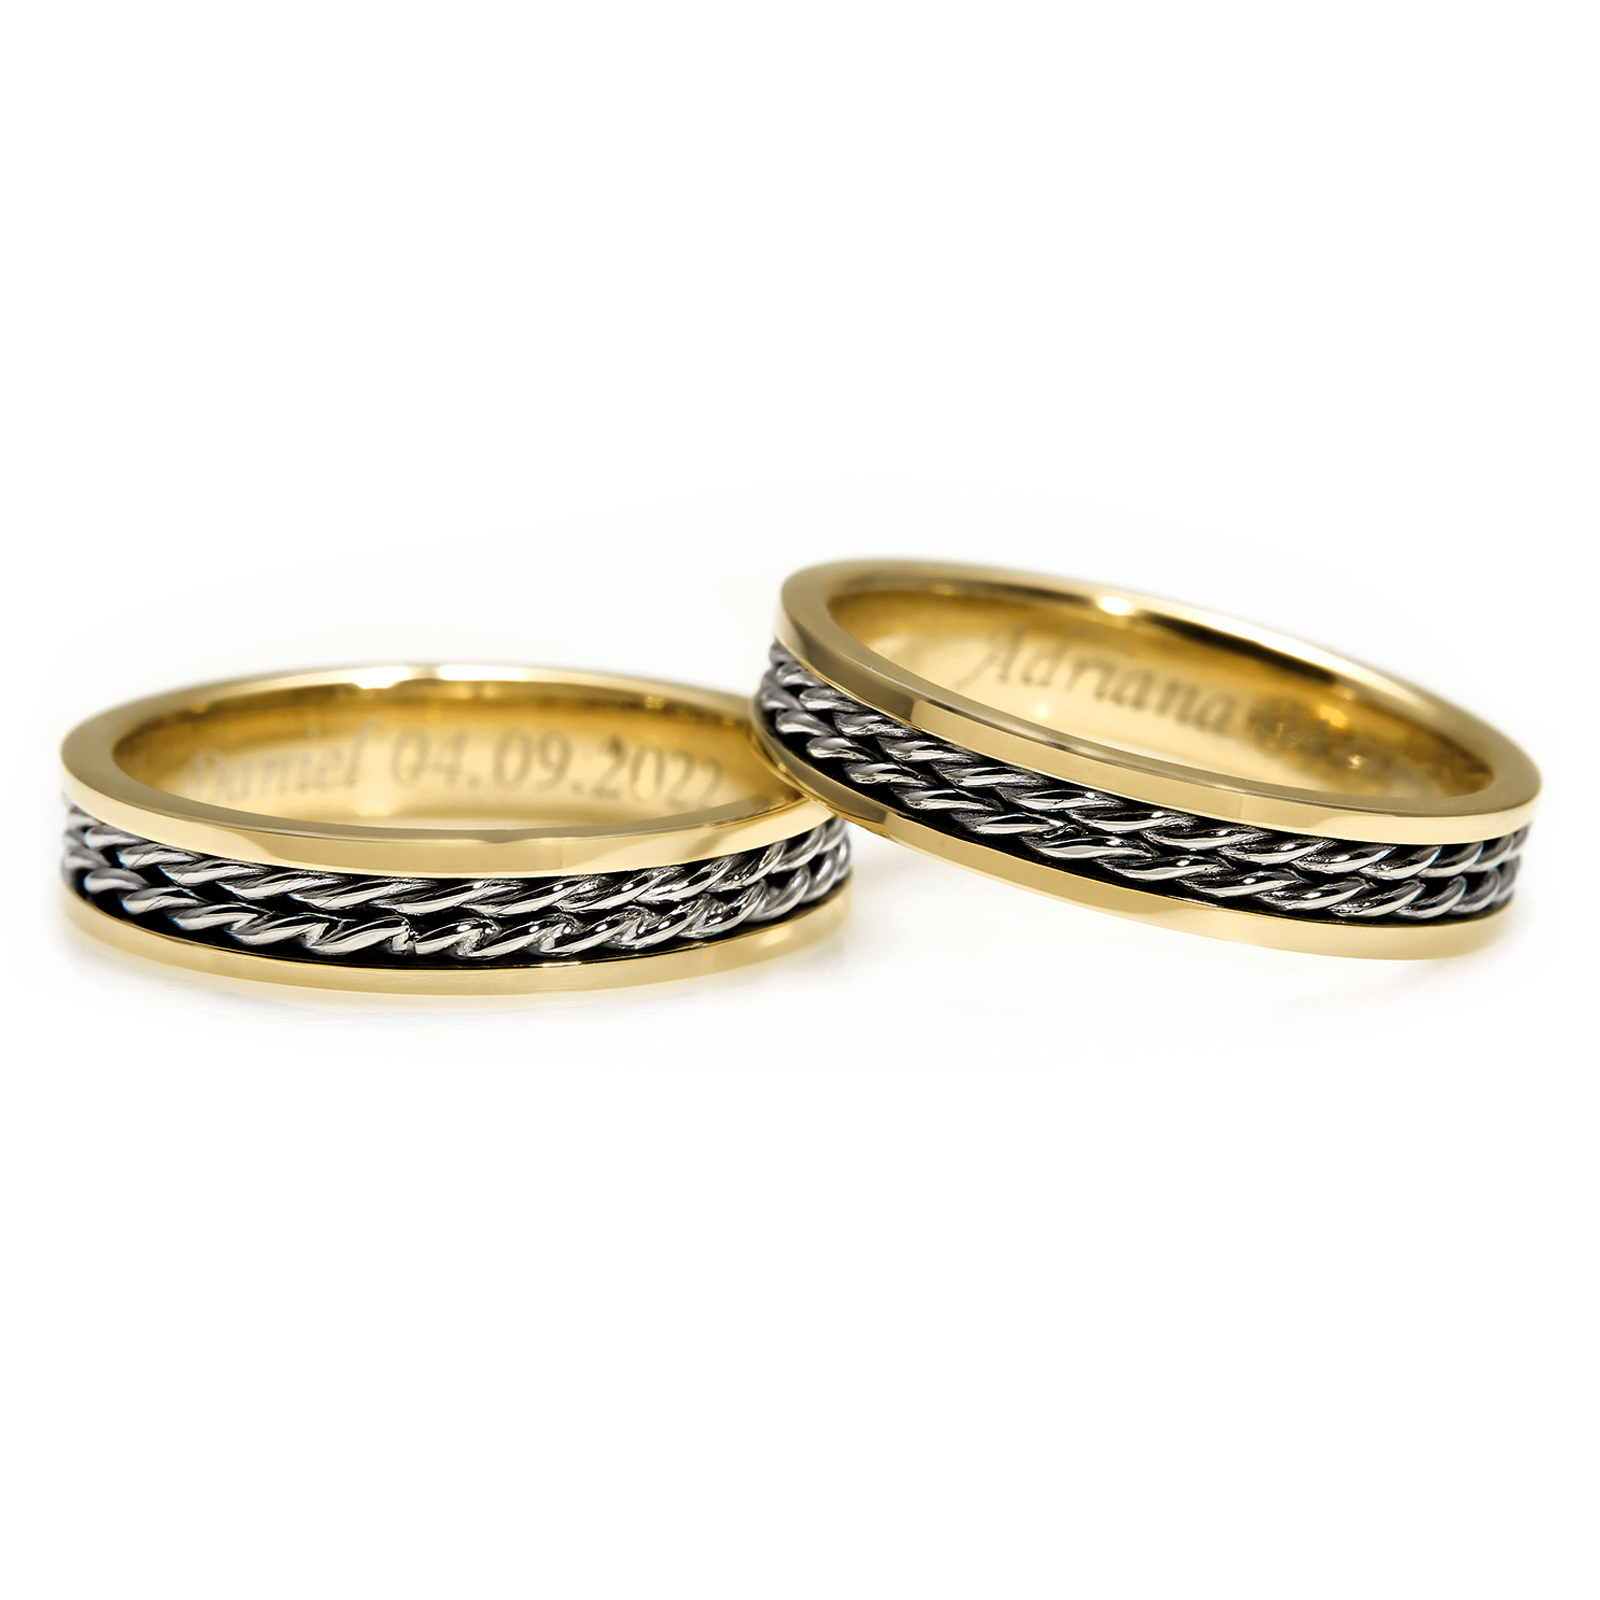 Exquisite Gold with Manual Double Braiding Wedding v1272 Valmand Rings 